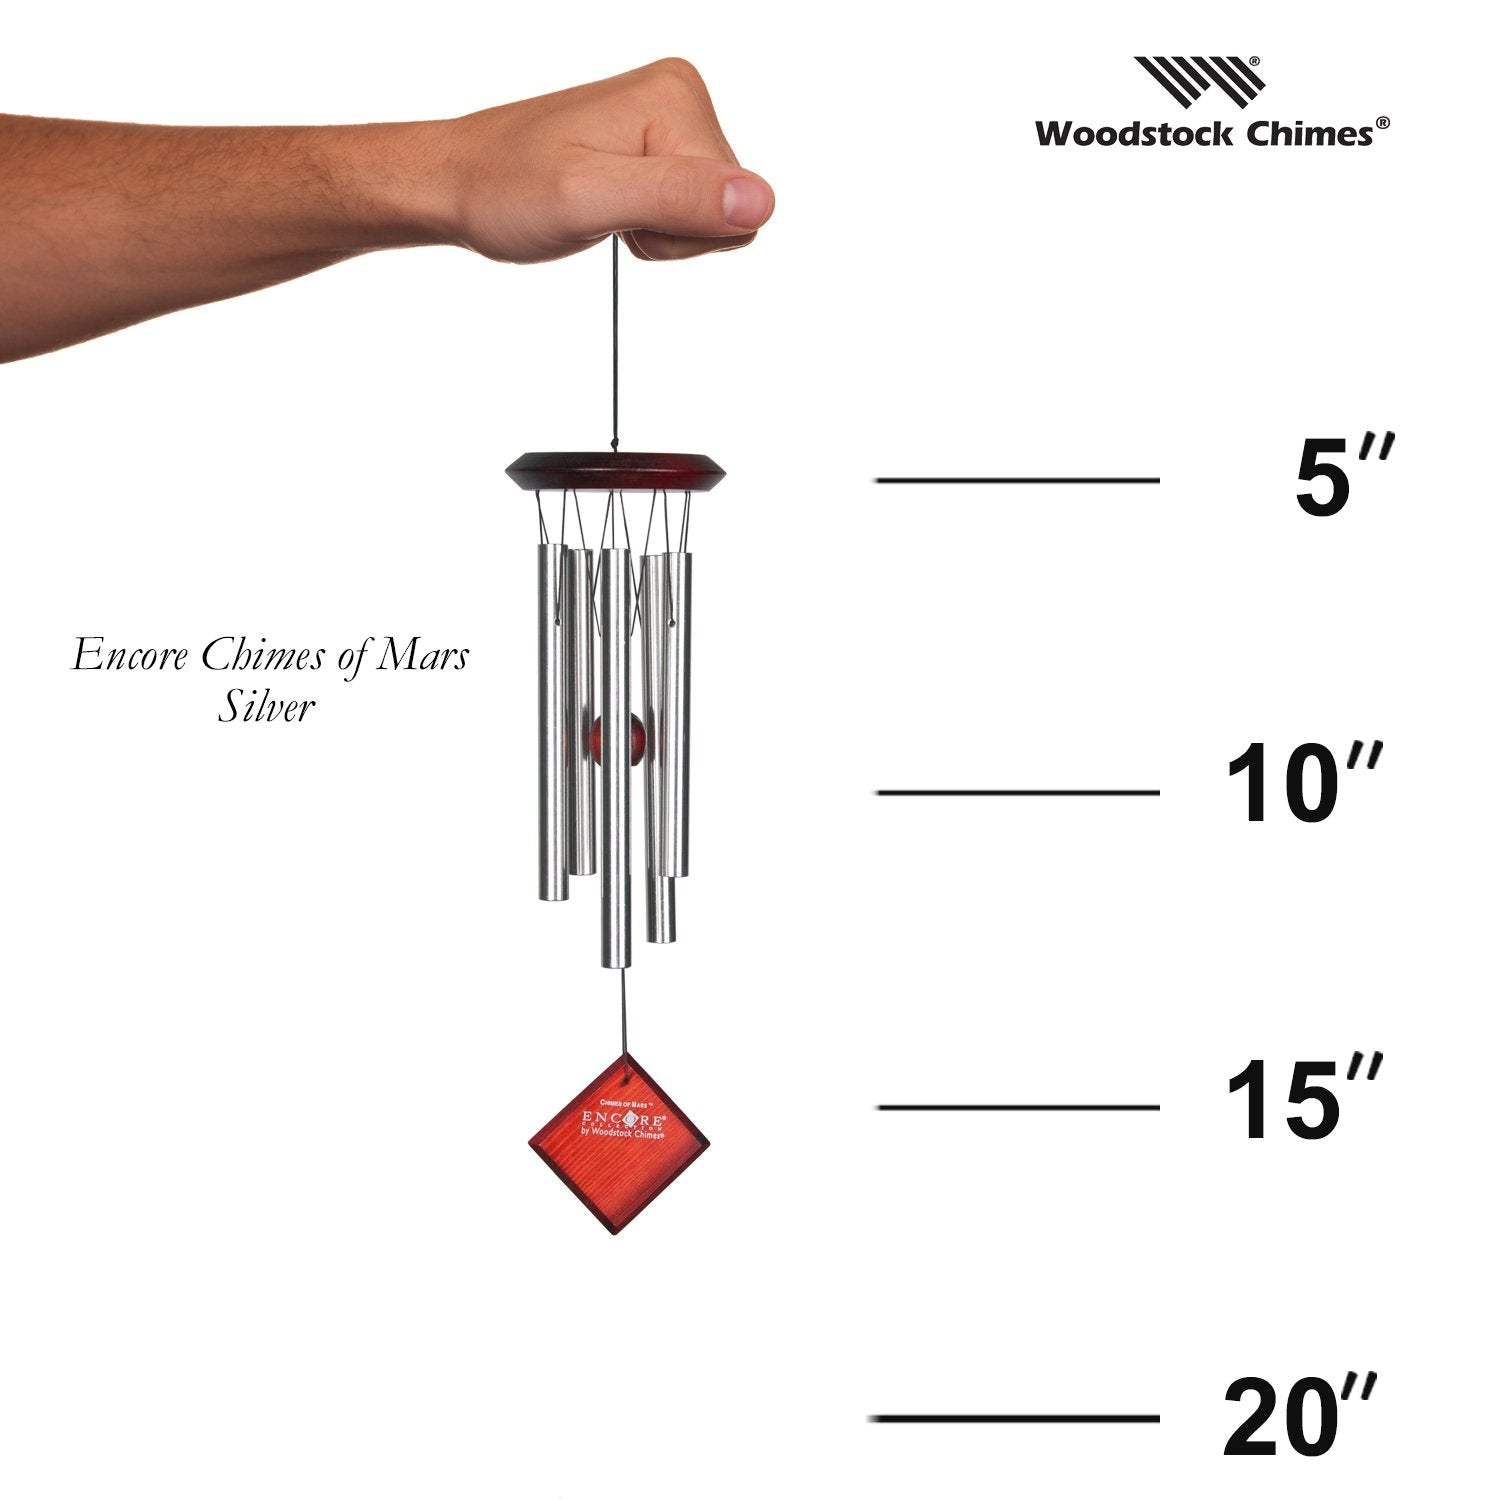 Encore Chimes of Mars - Silver proportion image